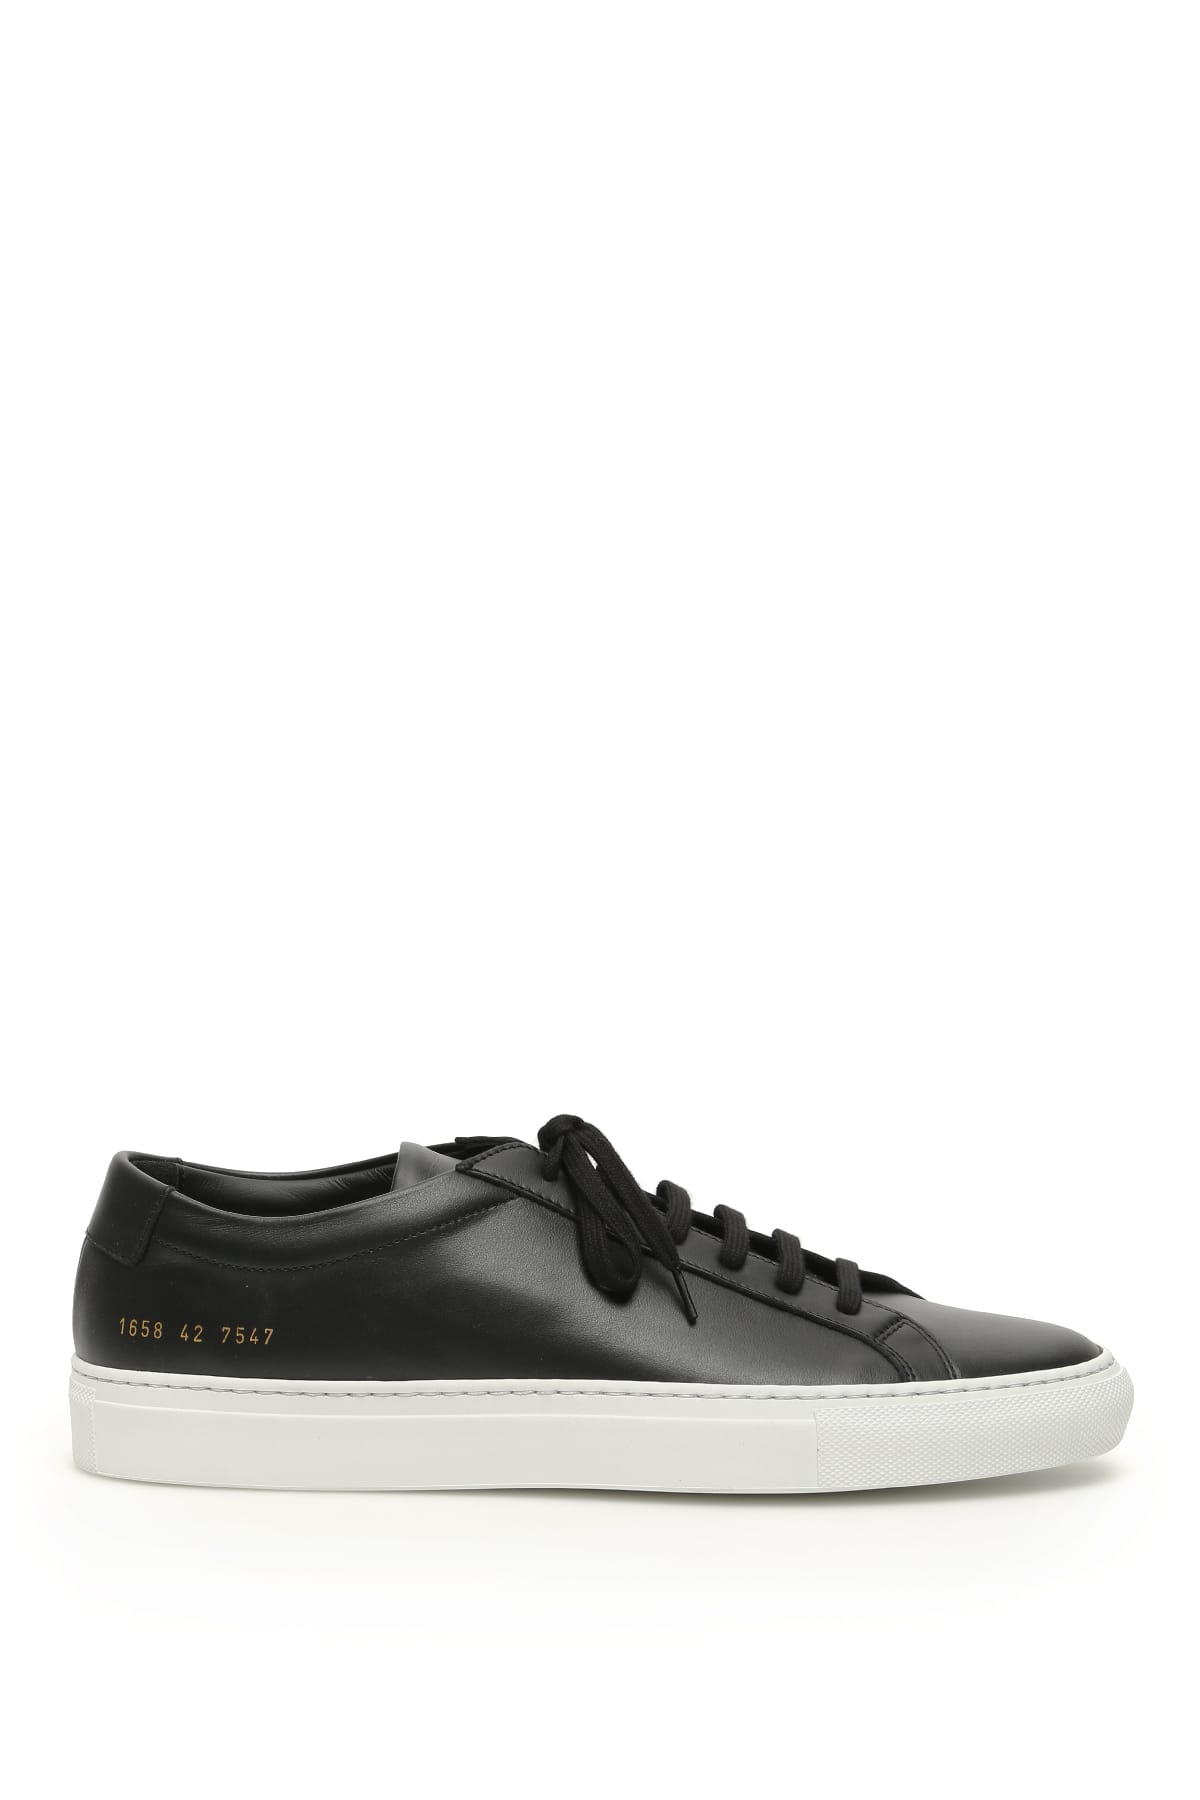 Common Projects Achilles Low White Sole Sneakers